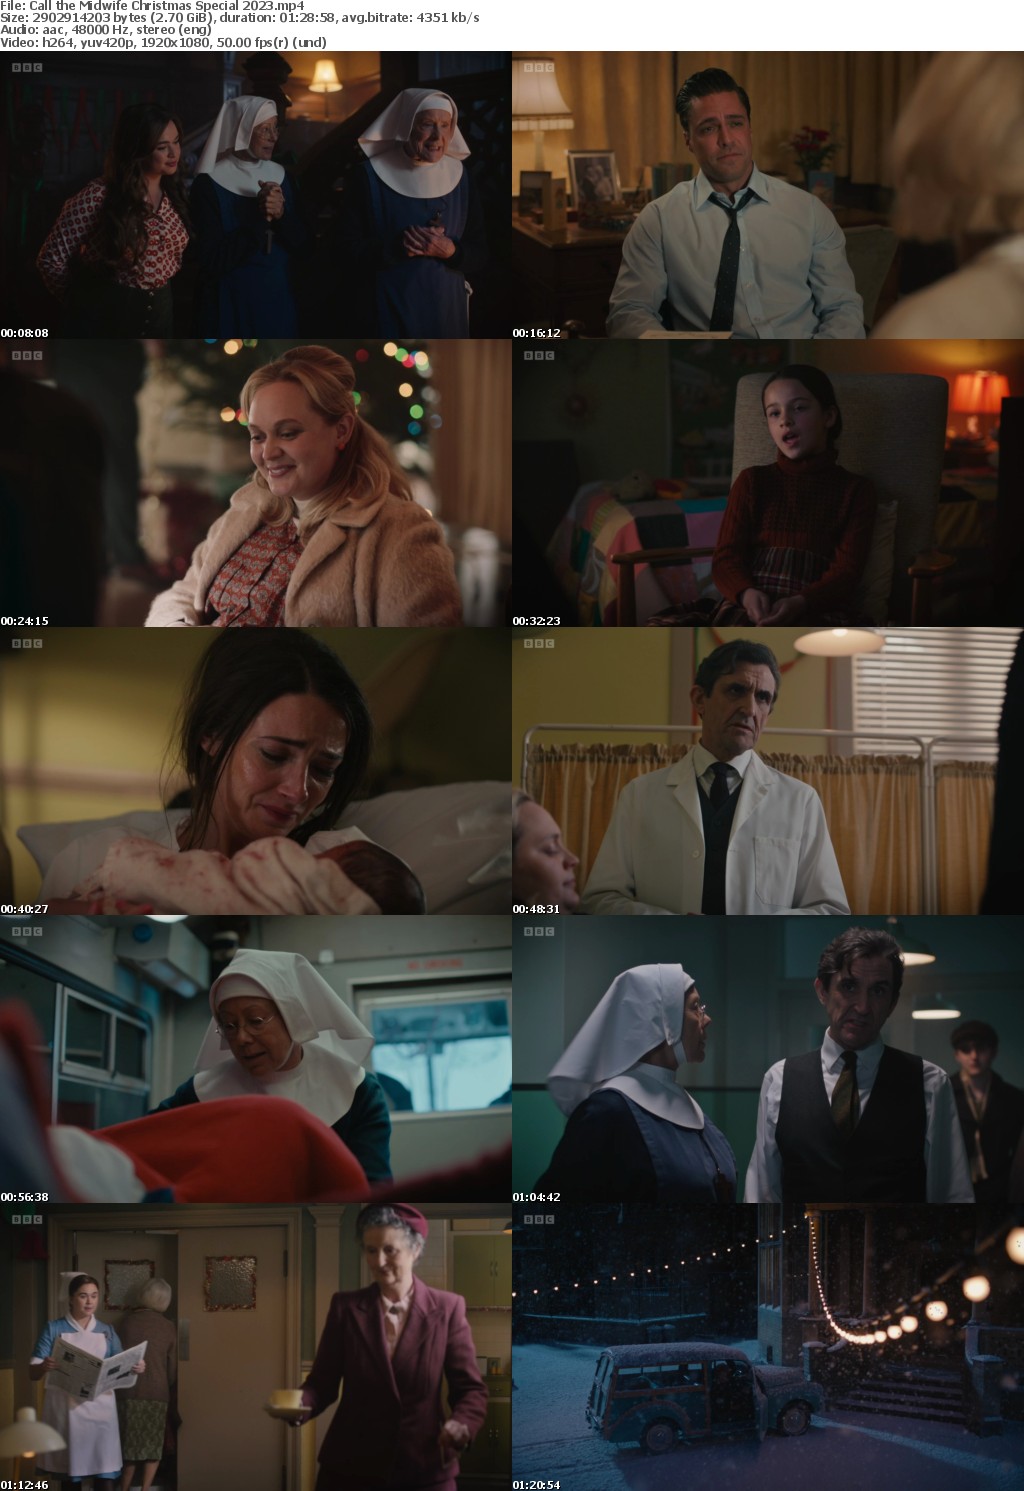 Call the Midwife Christmas Special 2023 (1080p, soft English subtitles)